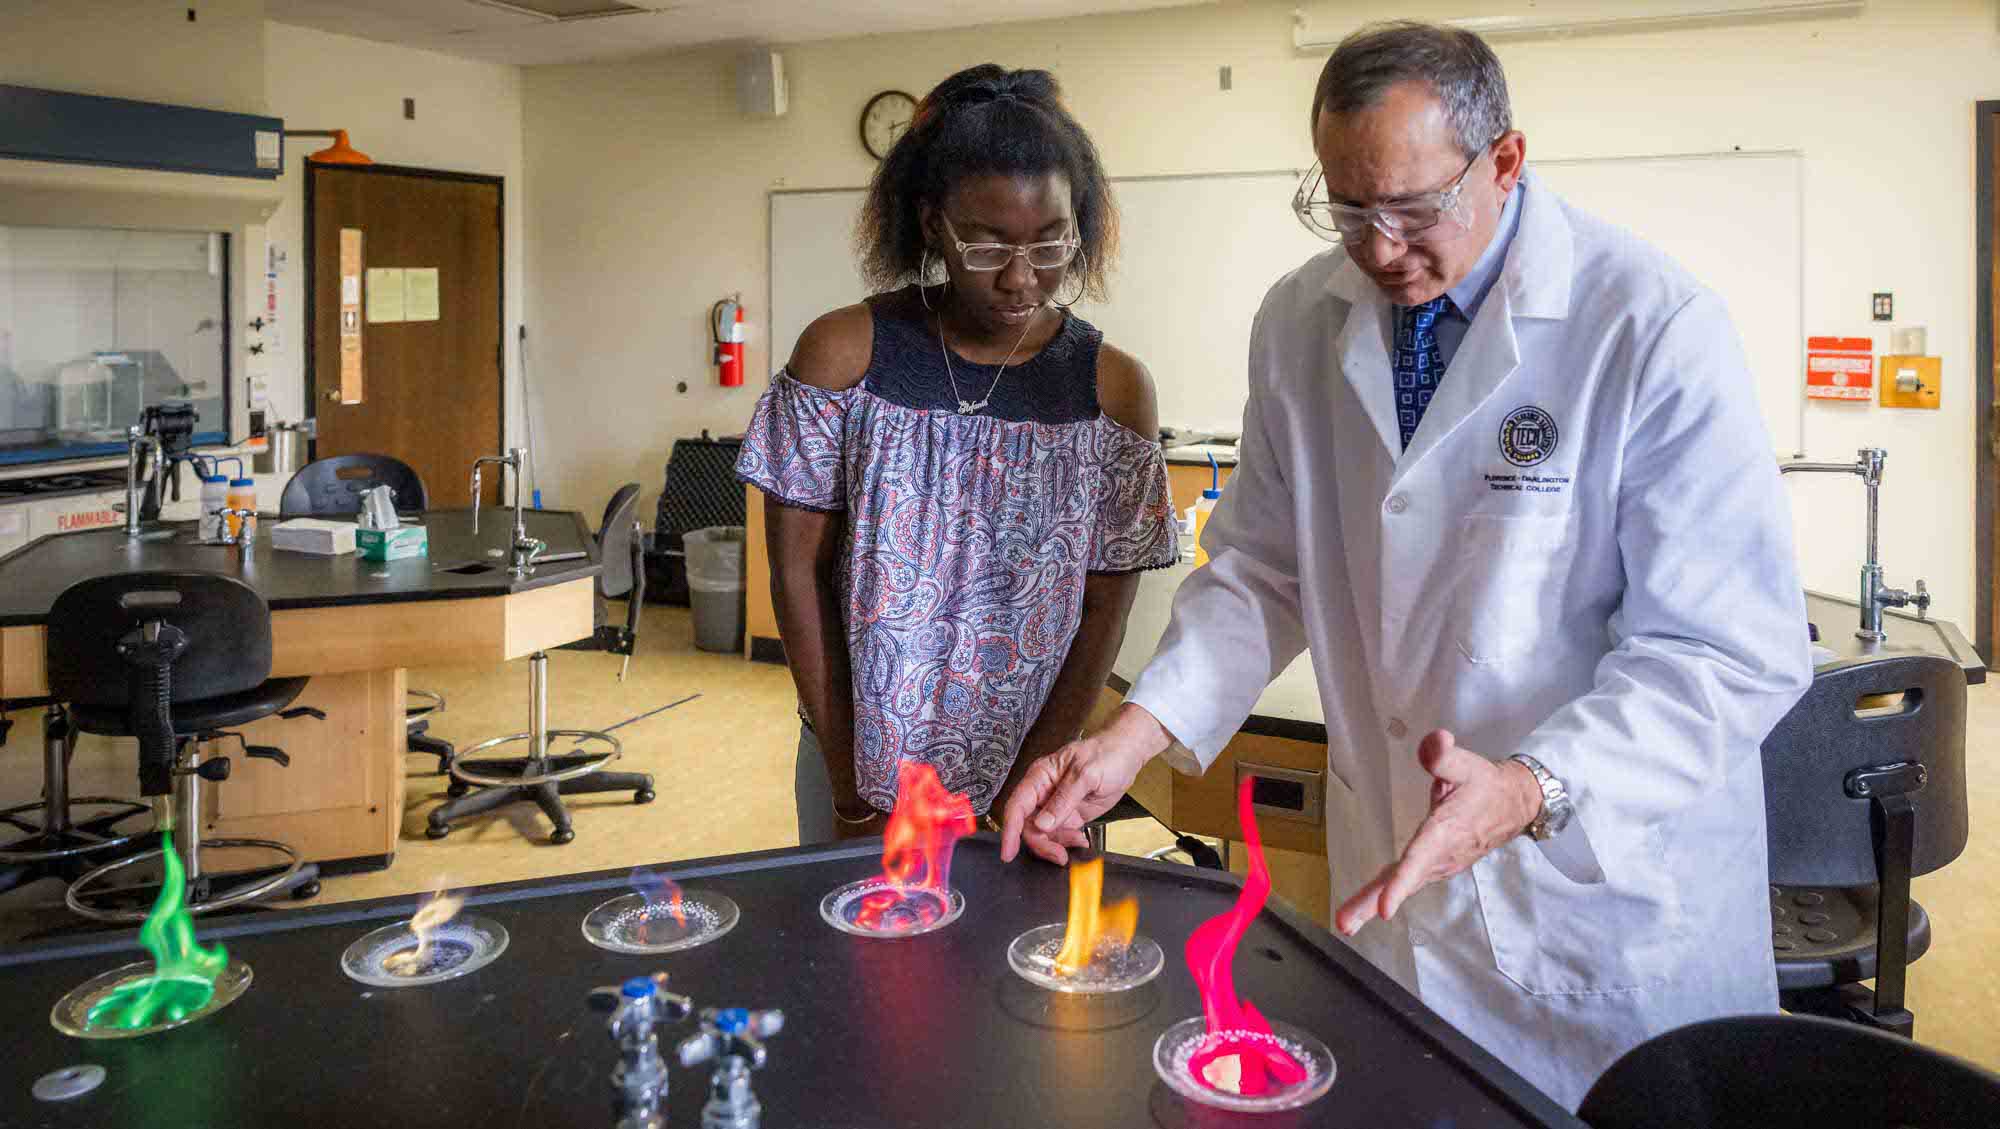 A Chemistry professor demonstrating to a student how different elements create different color fires.